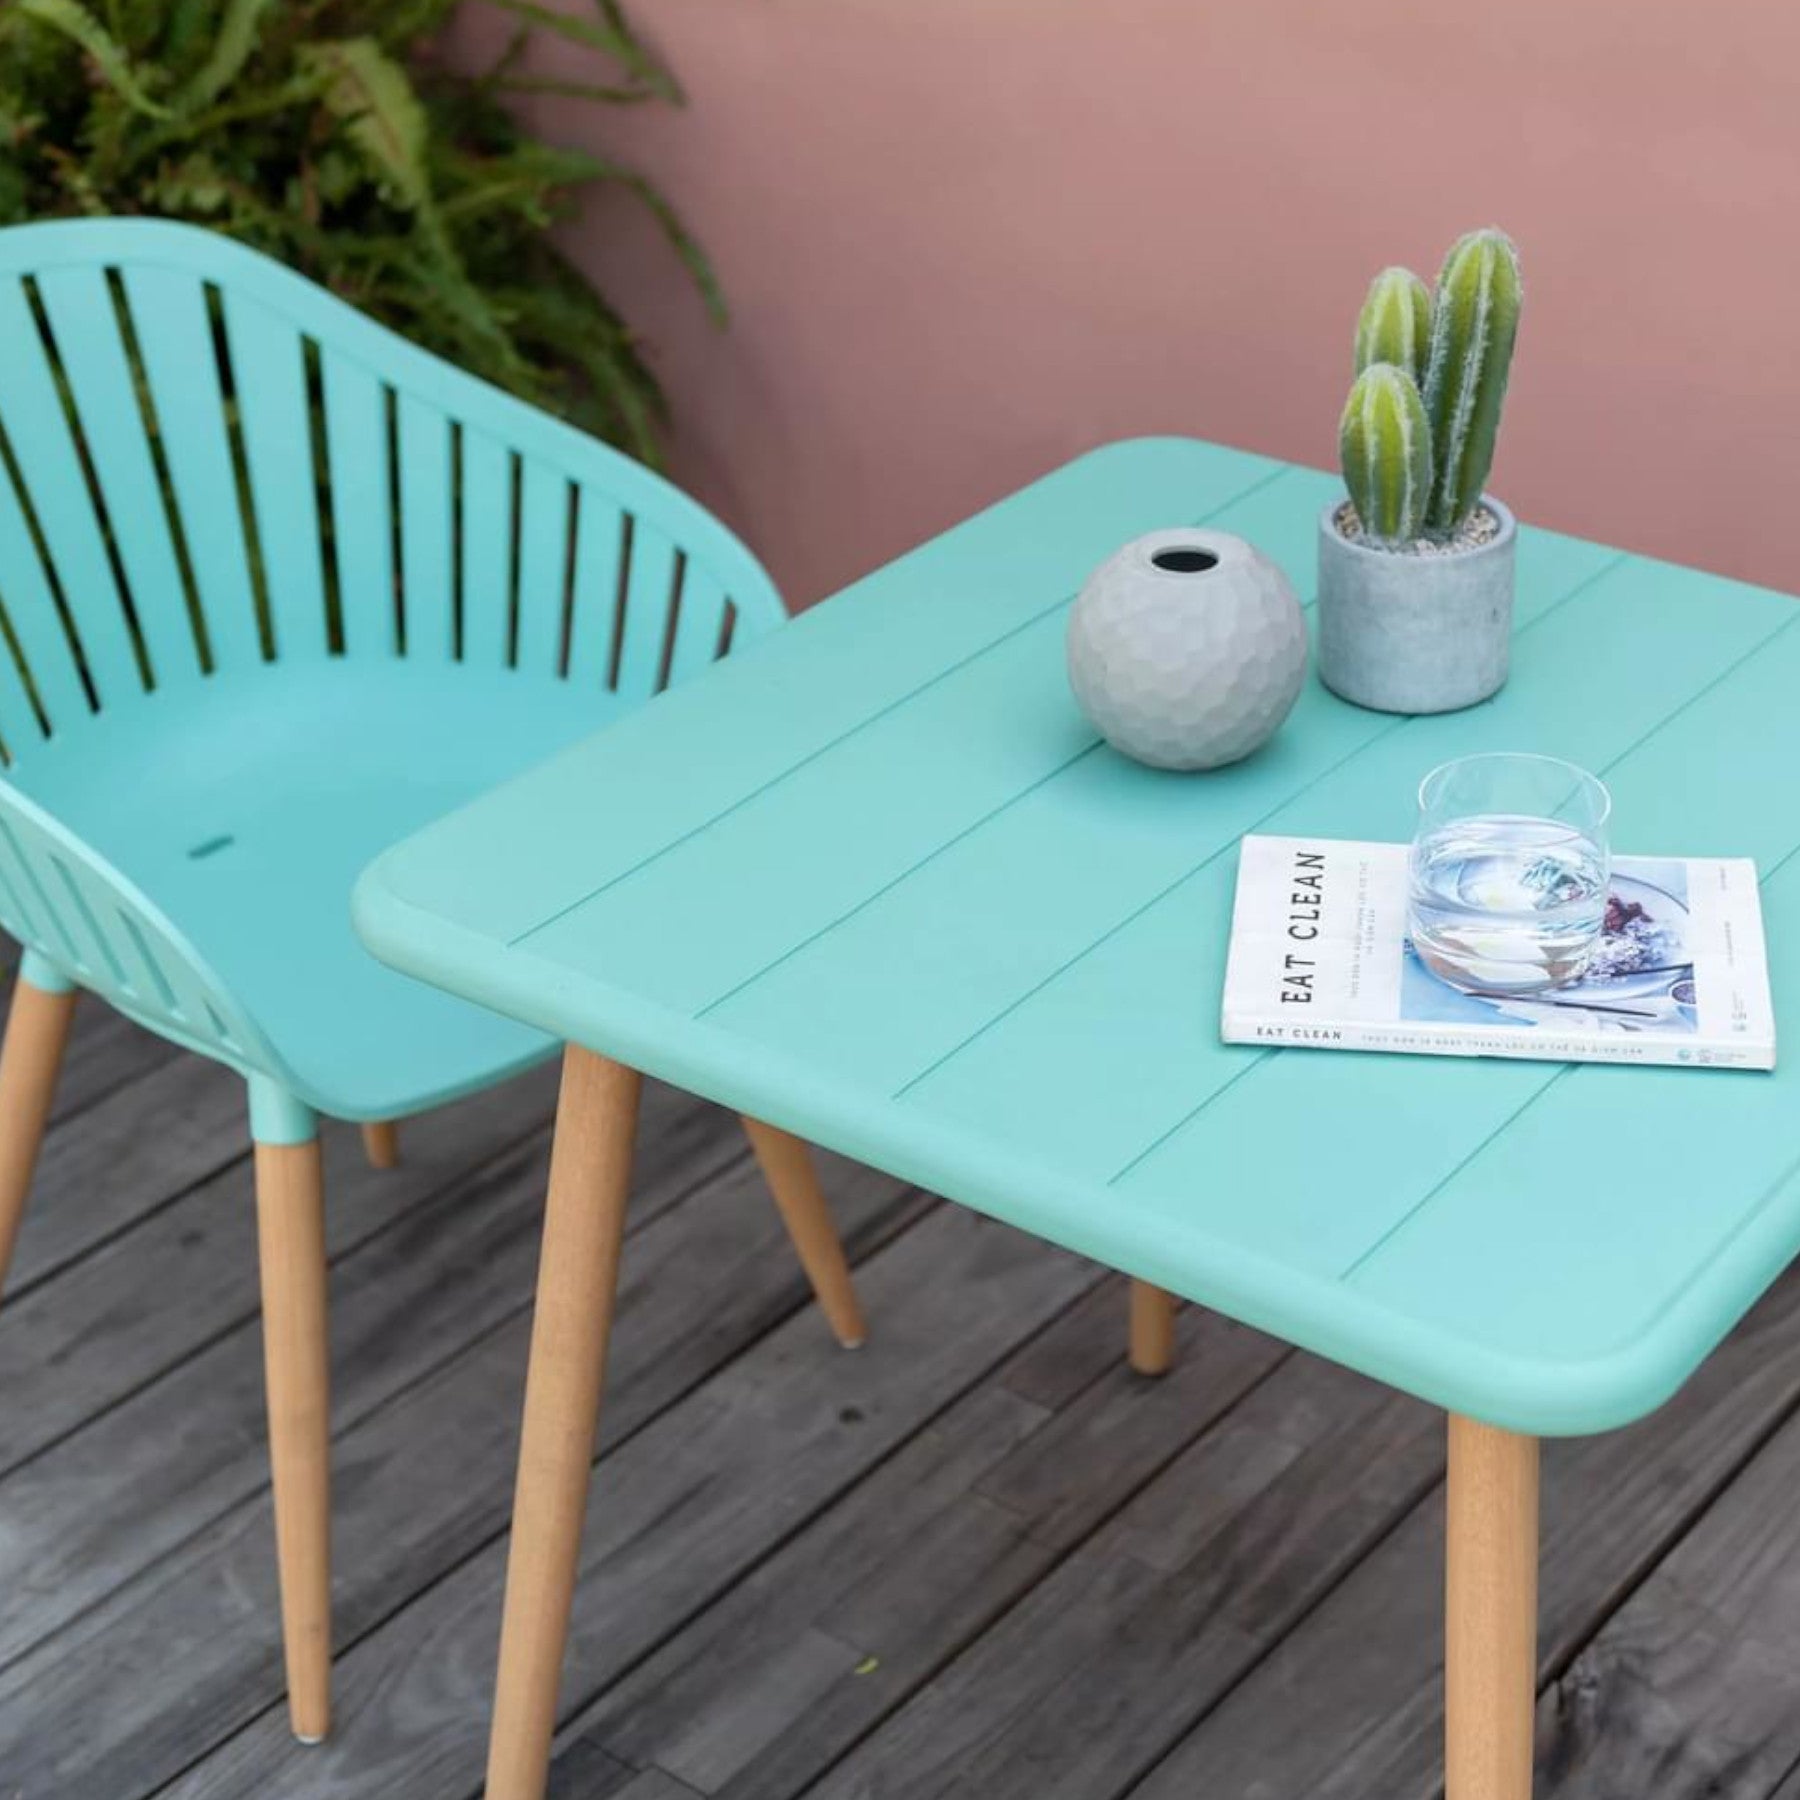 Modern outdoor patio with mint green chair and coordinating table, geometric vase, potted cactus, glass of water, and 'Eat Clean' magazine, against a pink wall on a wooden deck.